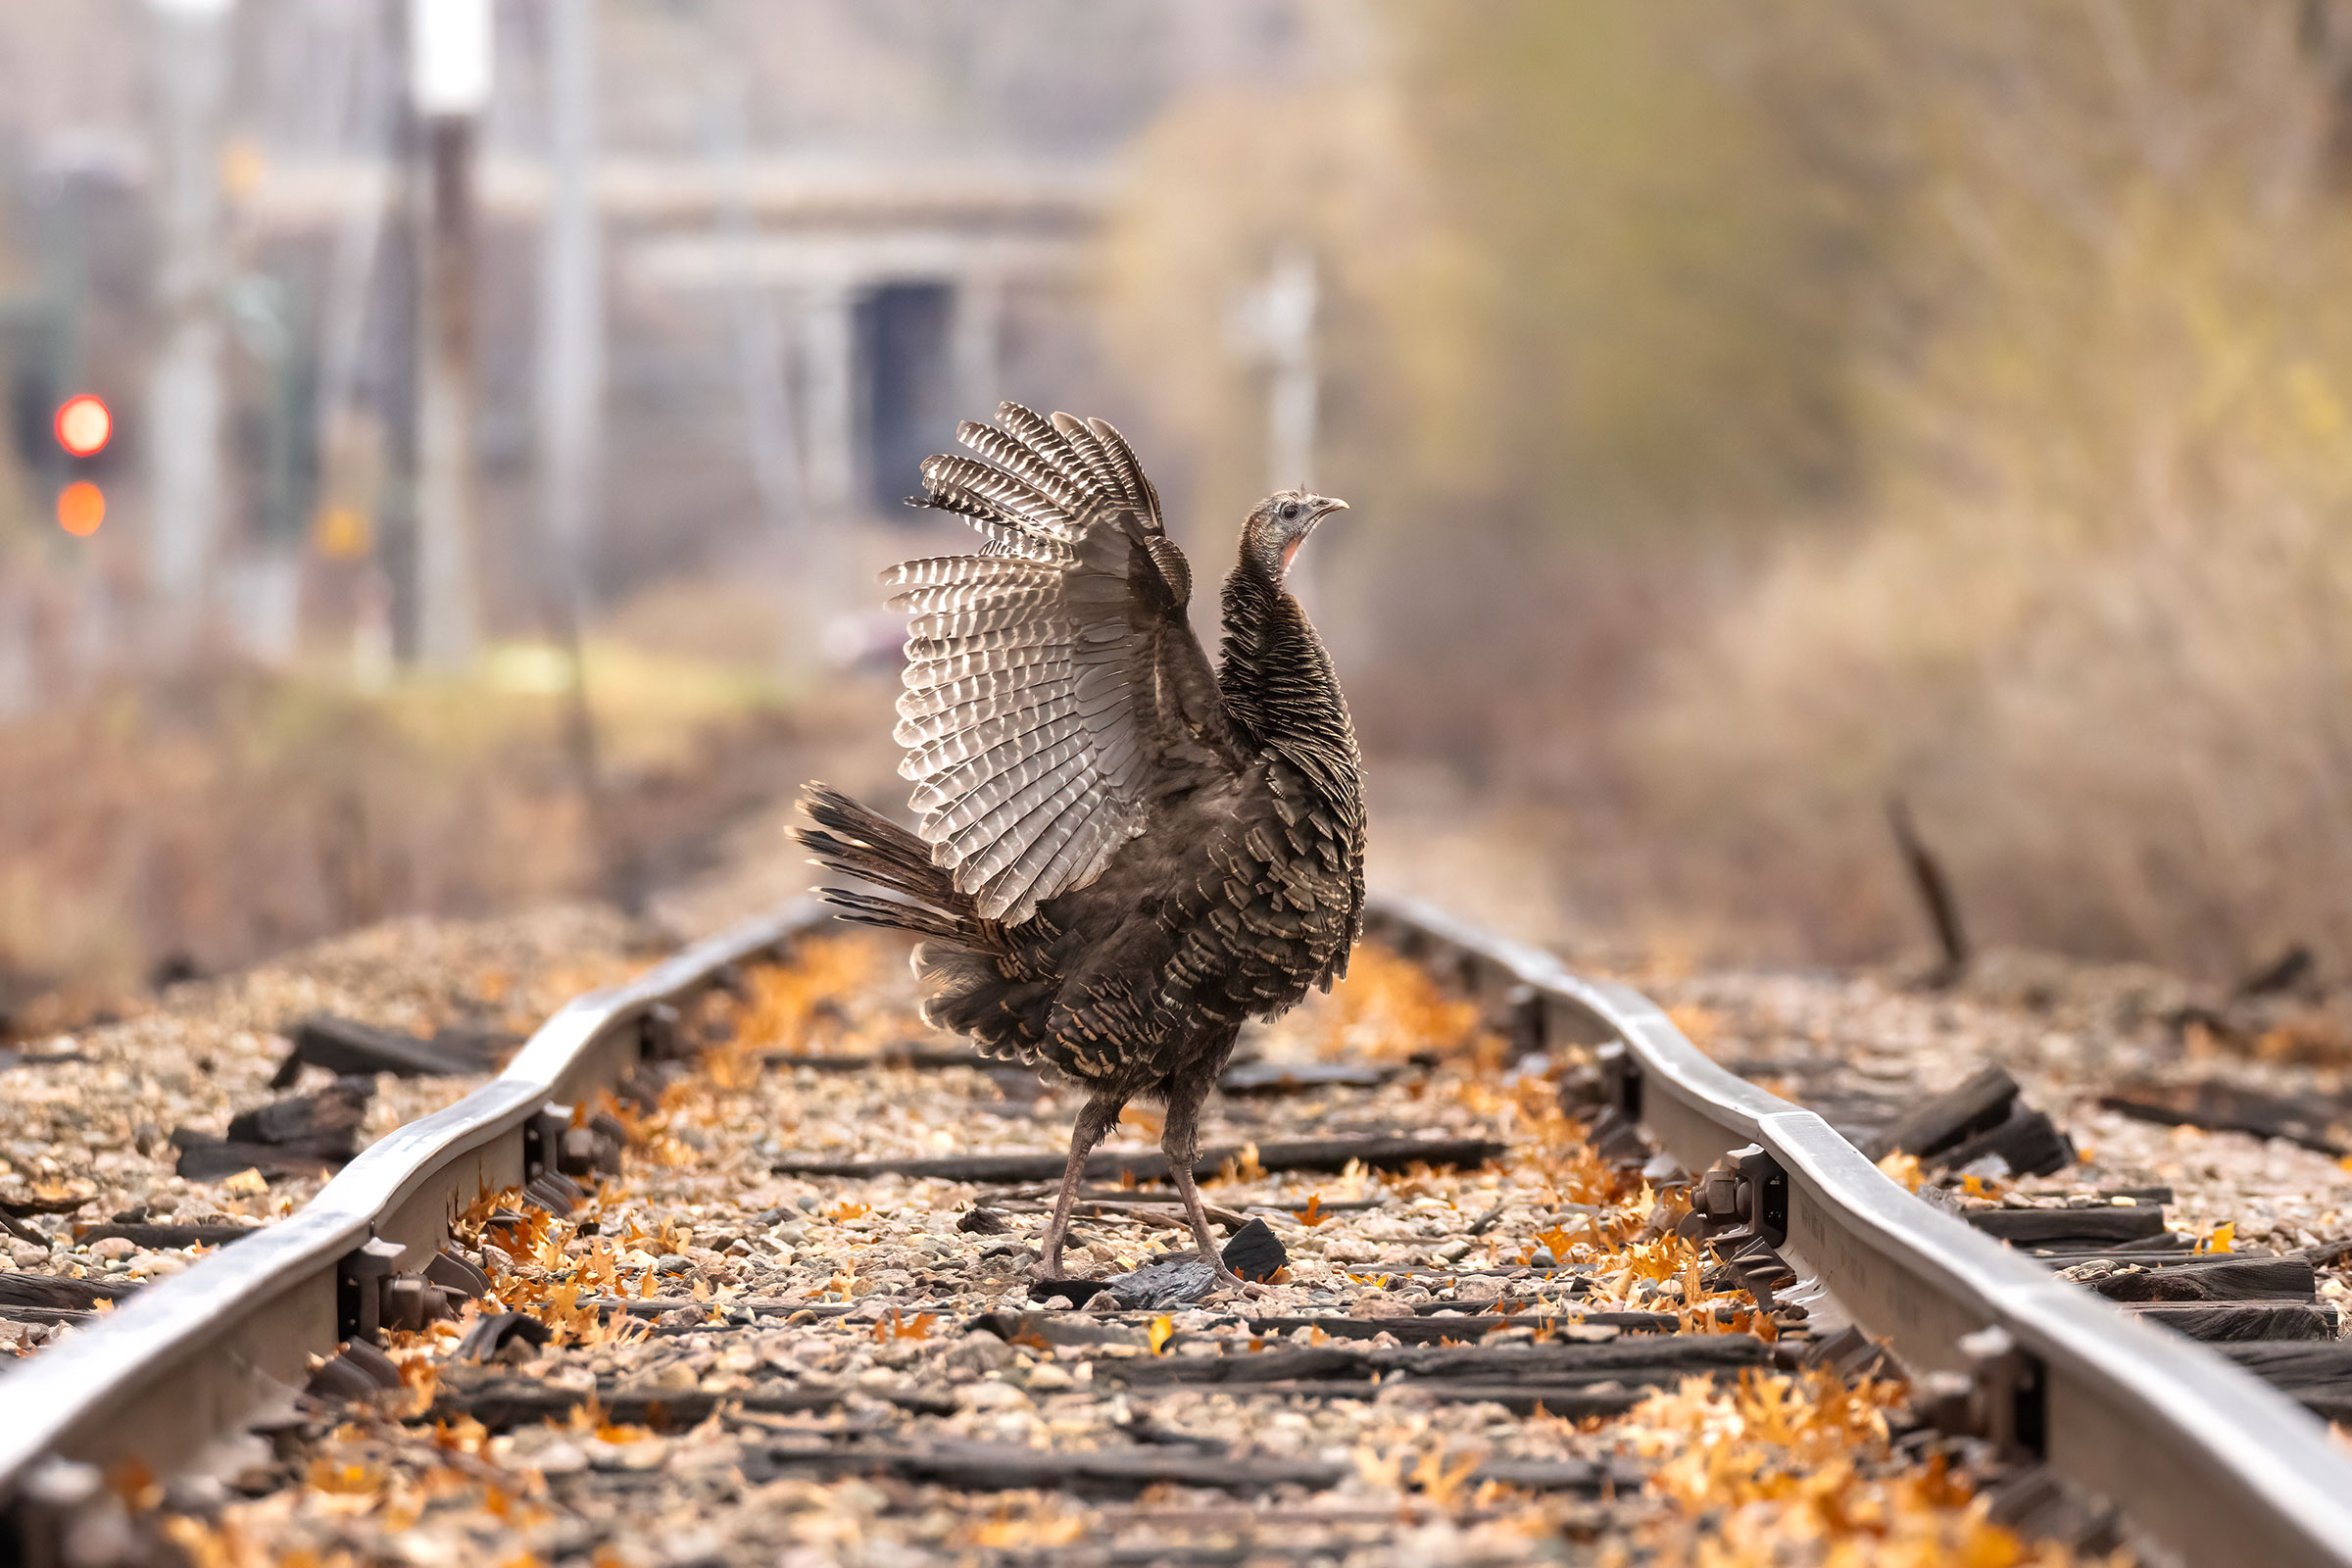 A female Wild Turkey stands in profile, and her head is held high and wings are fanned out behind her. She stands between railroad tracks littered with leaves that extend into the distance.
